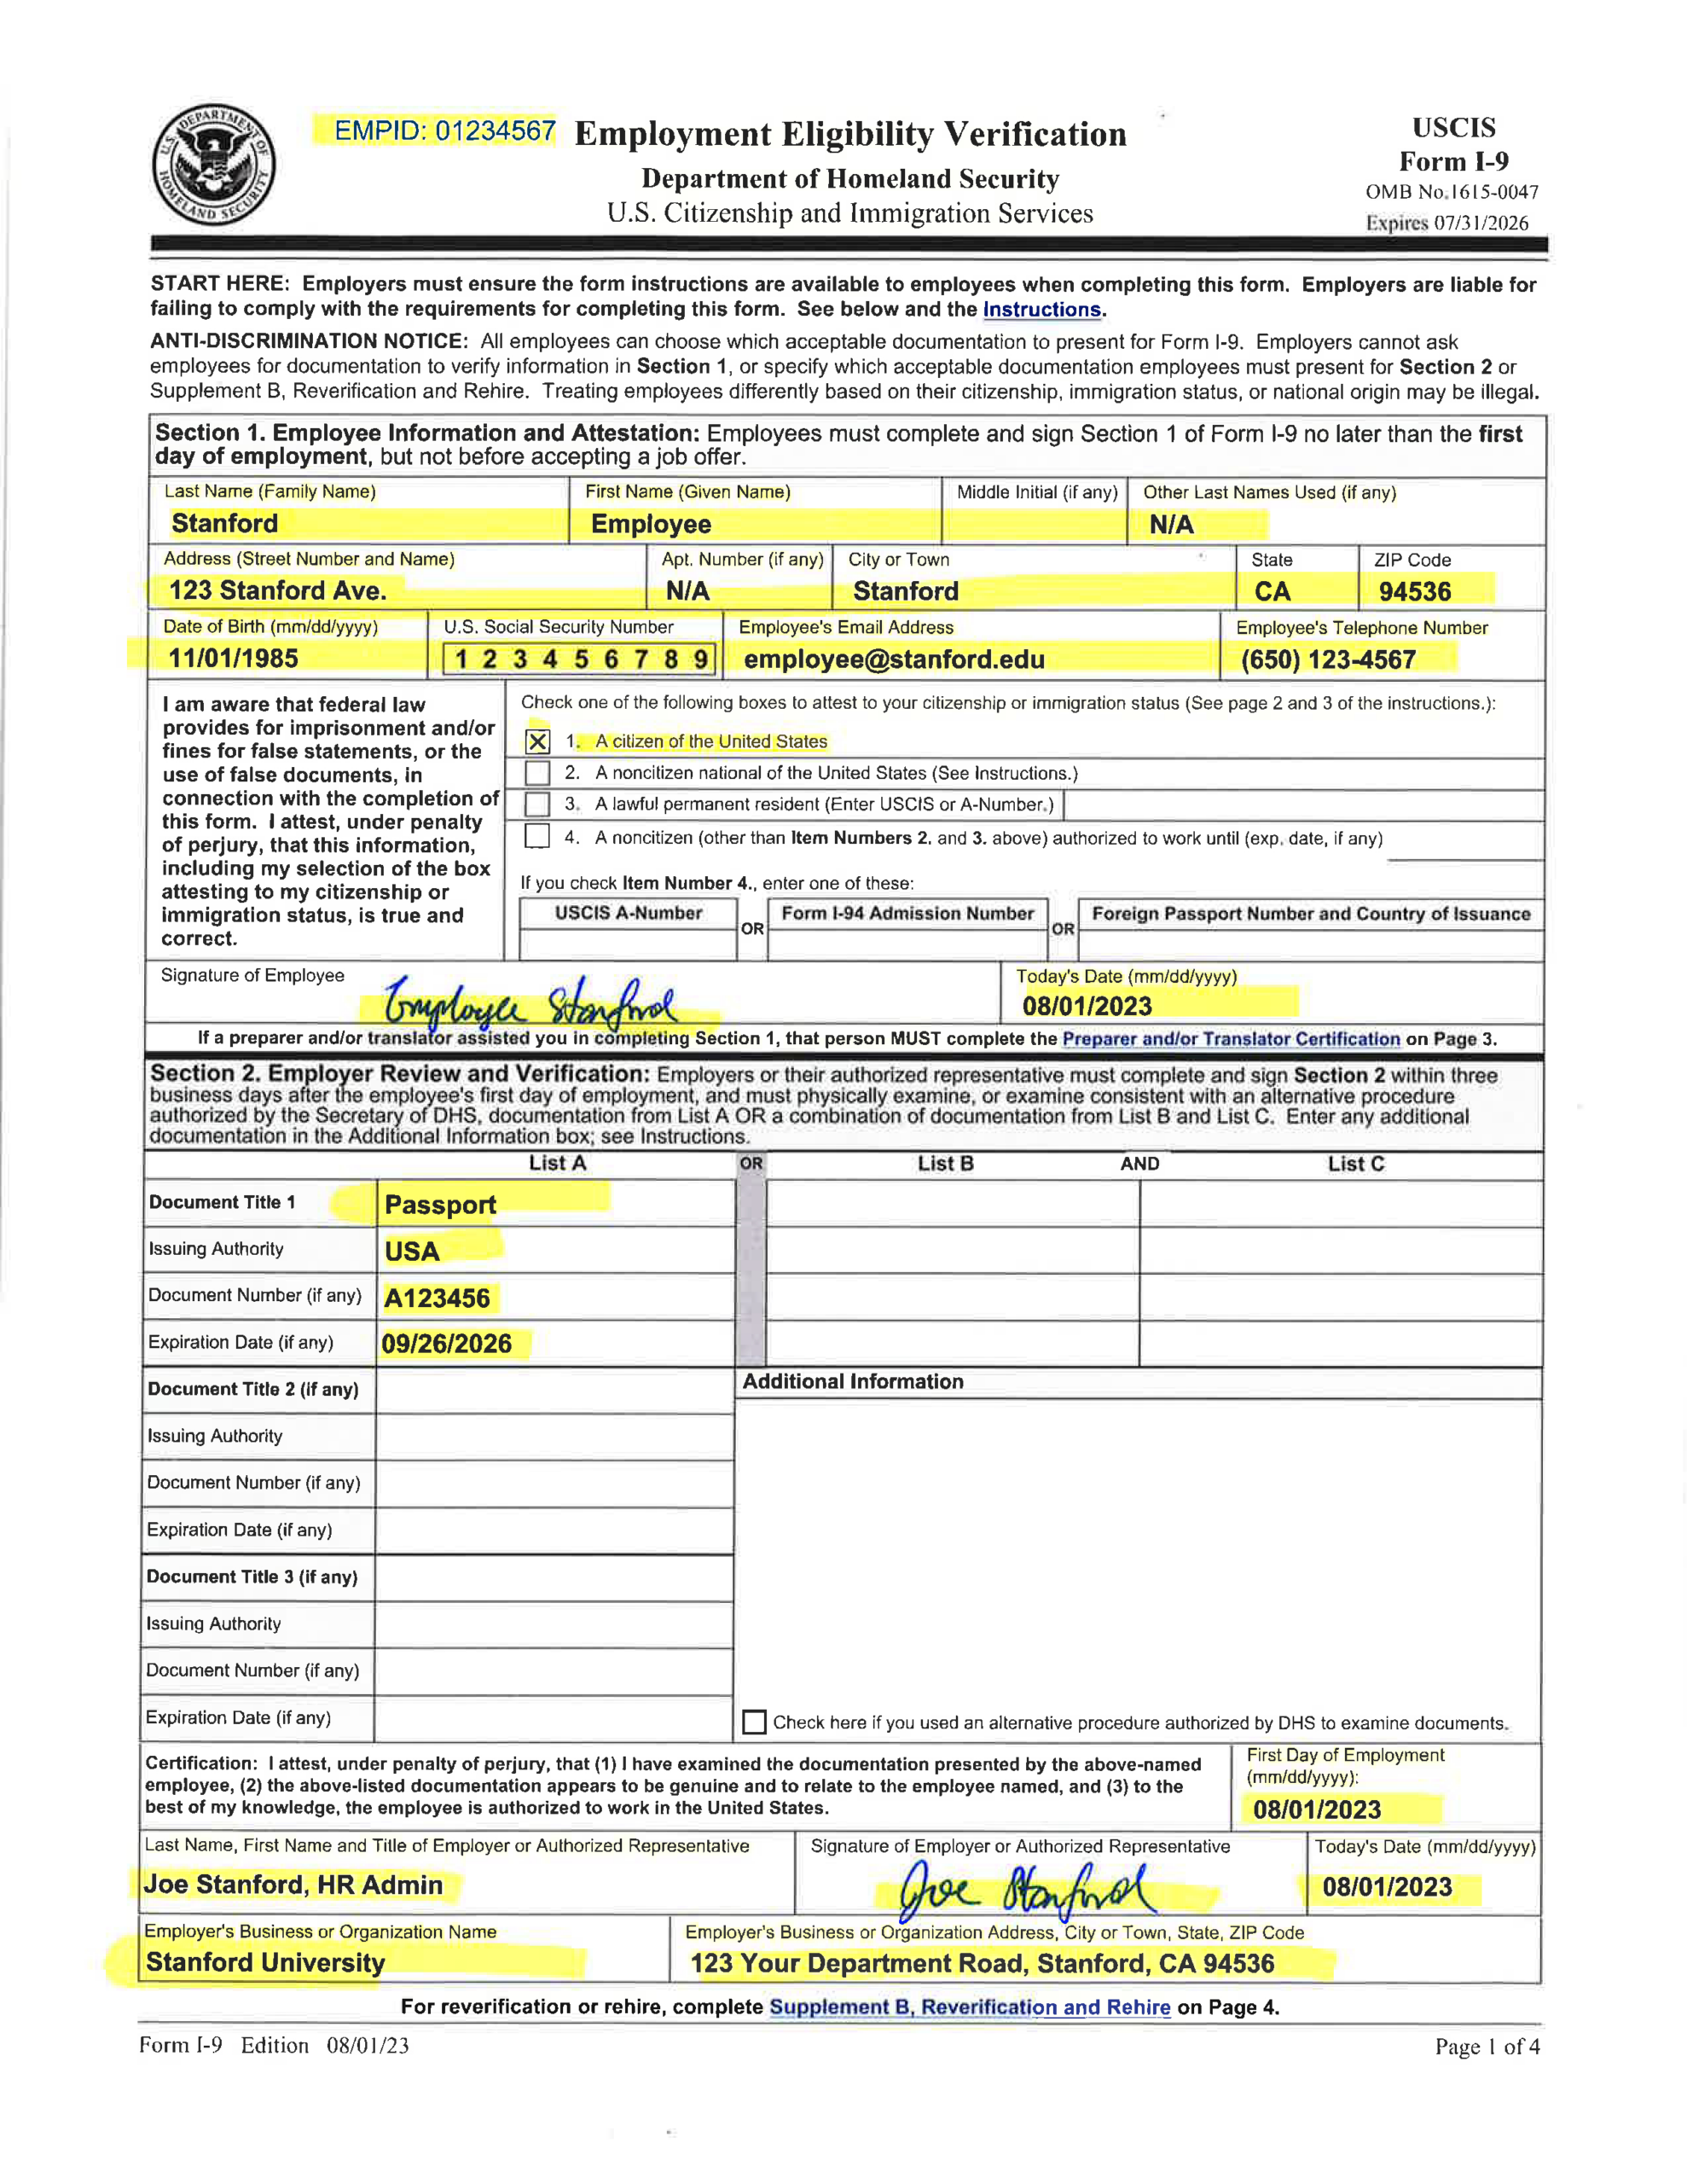 Examples Of Completed Form I-9 For Stanford intended for What is an USCIS I-9 Form?